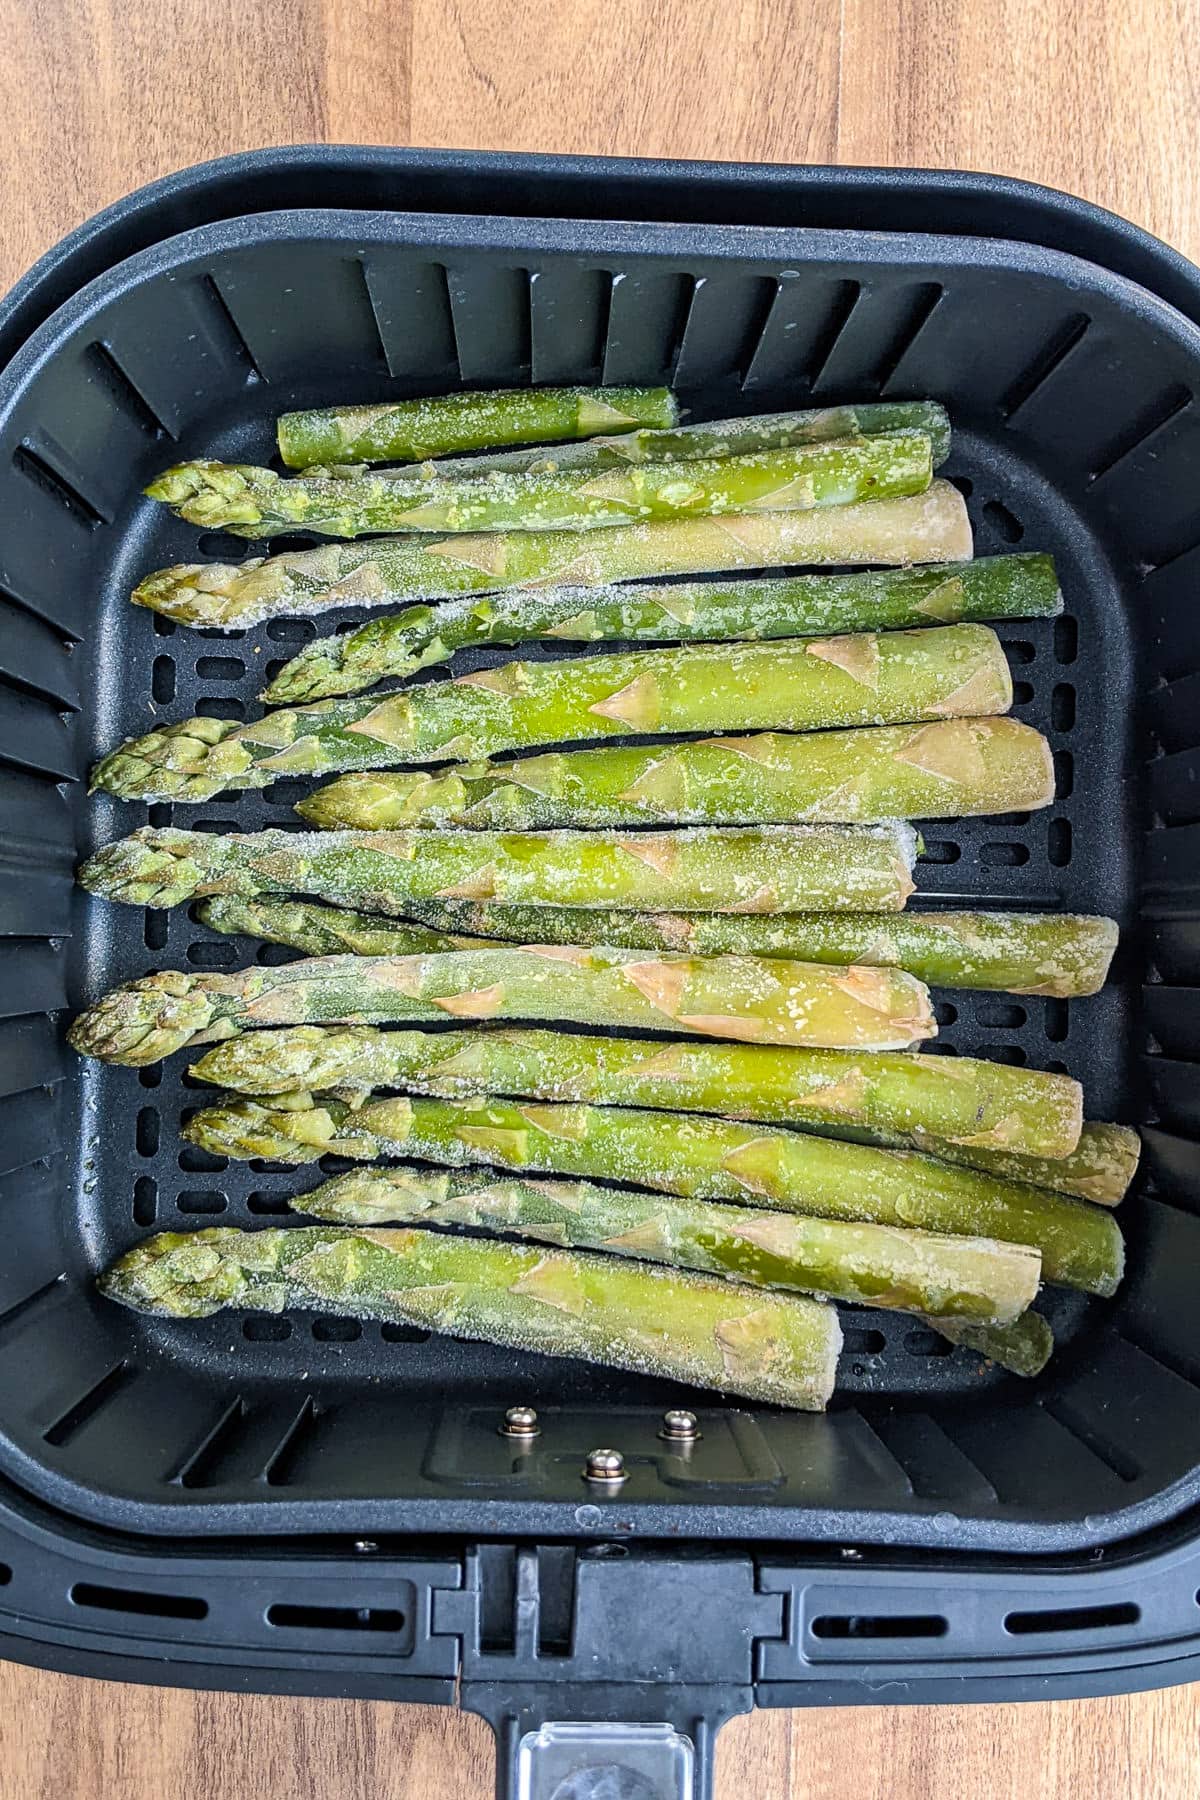 Top view of air fryer basket full with frozen asparagus.